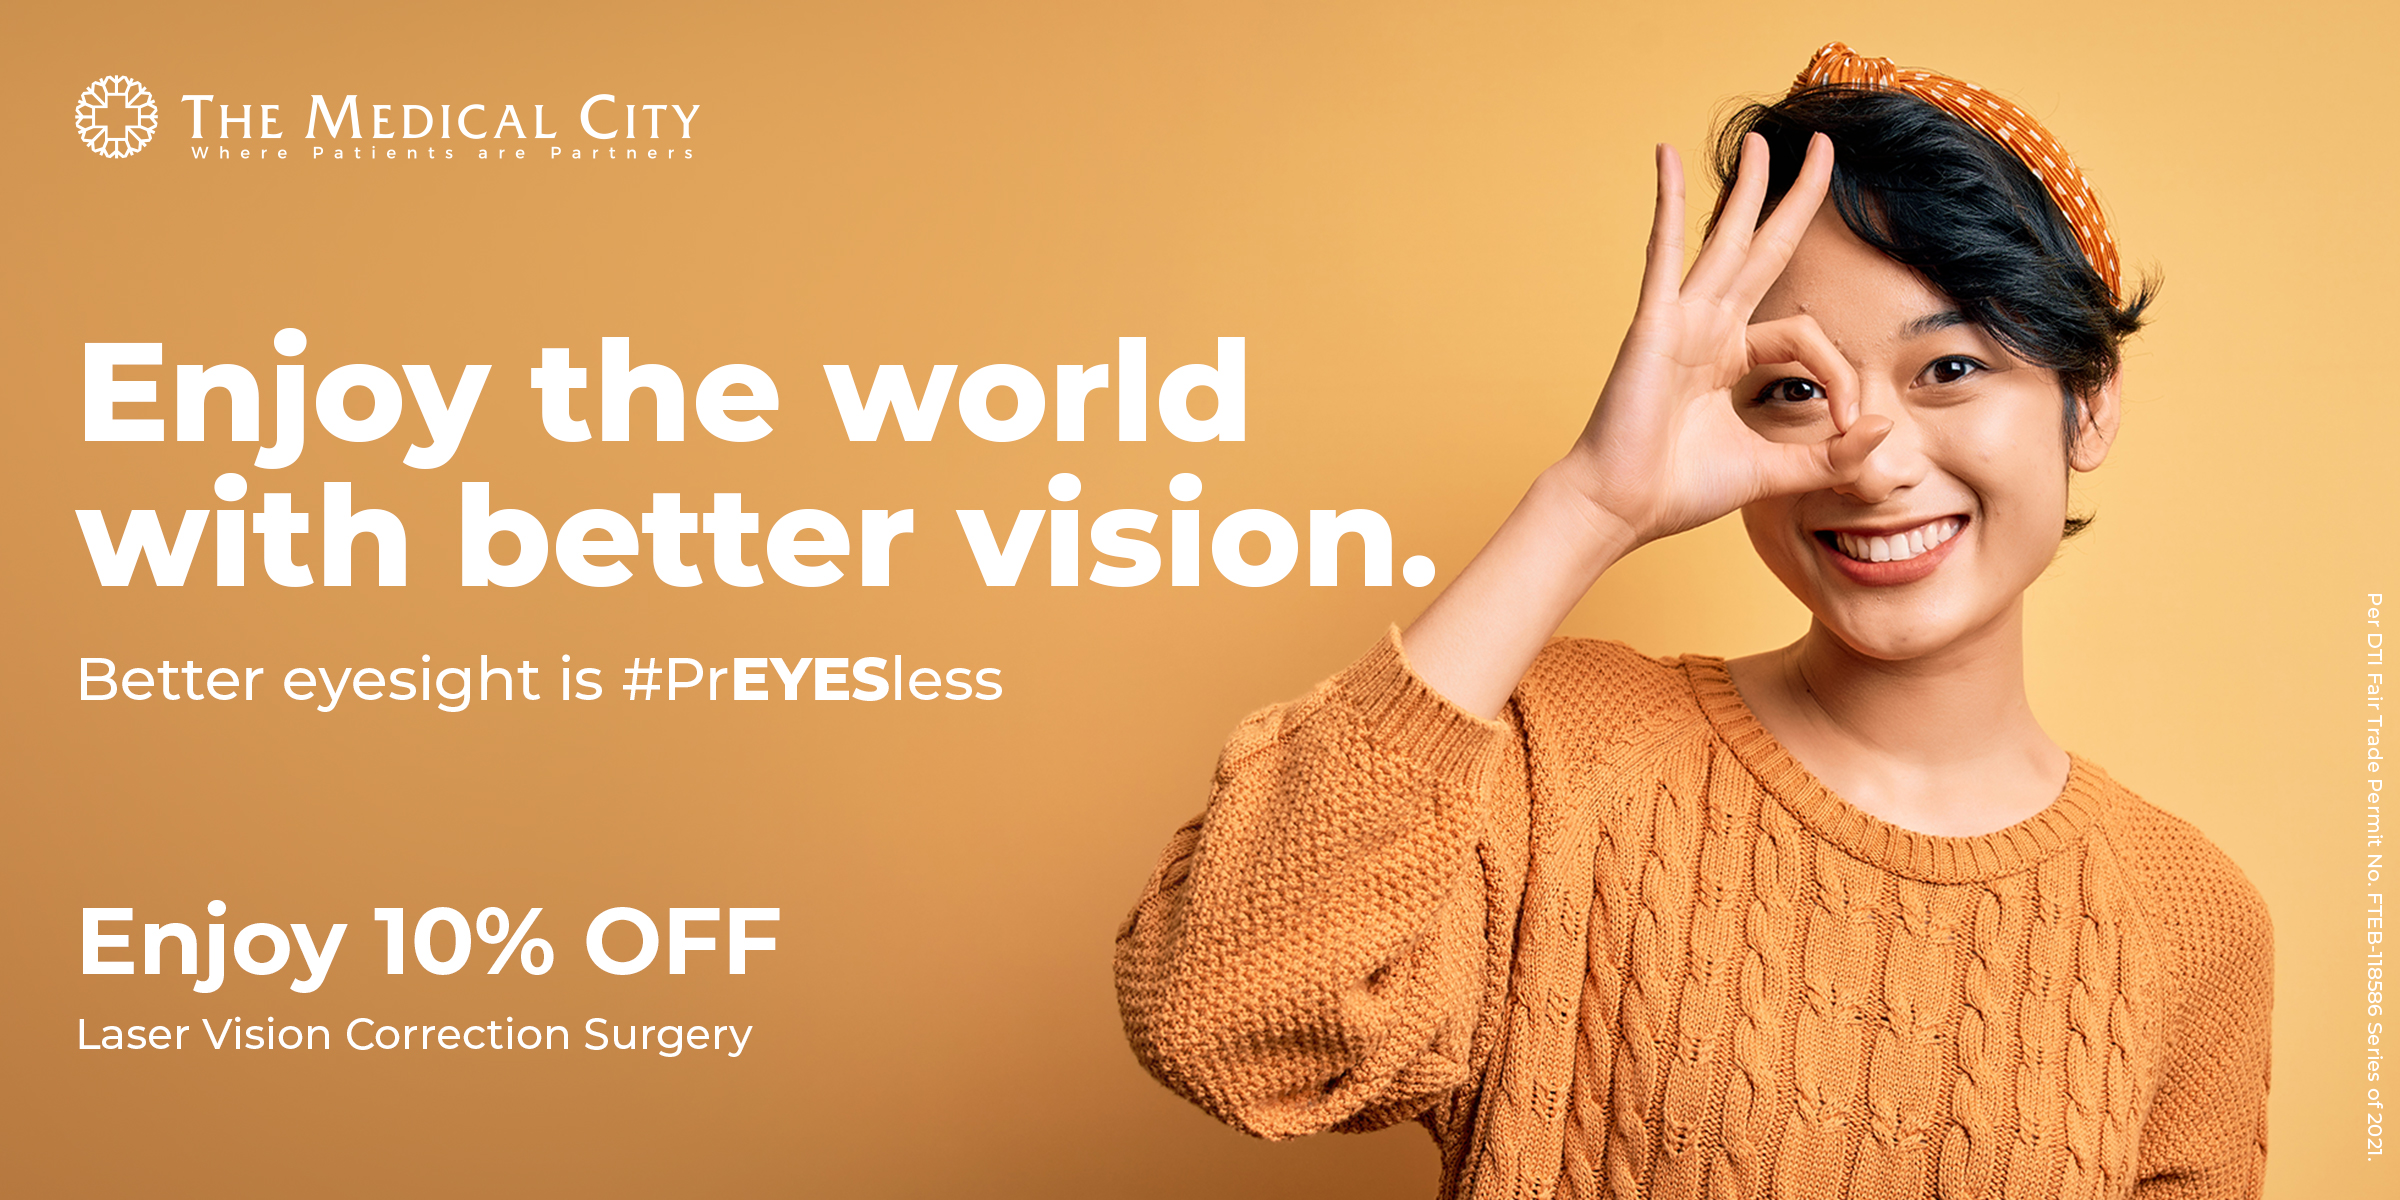 The Medical City Offers Discount on Laser Vision Correction Surgery ...